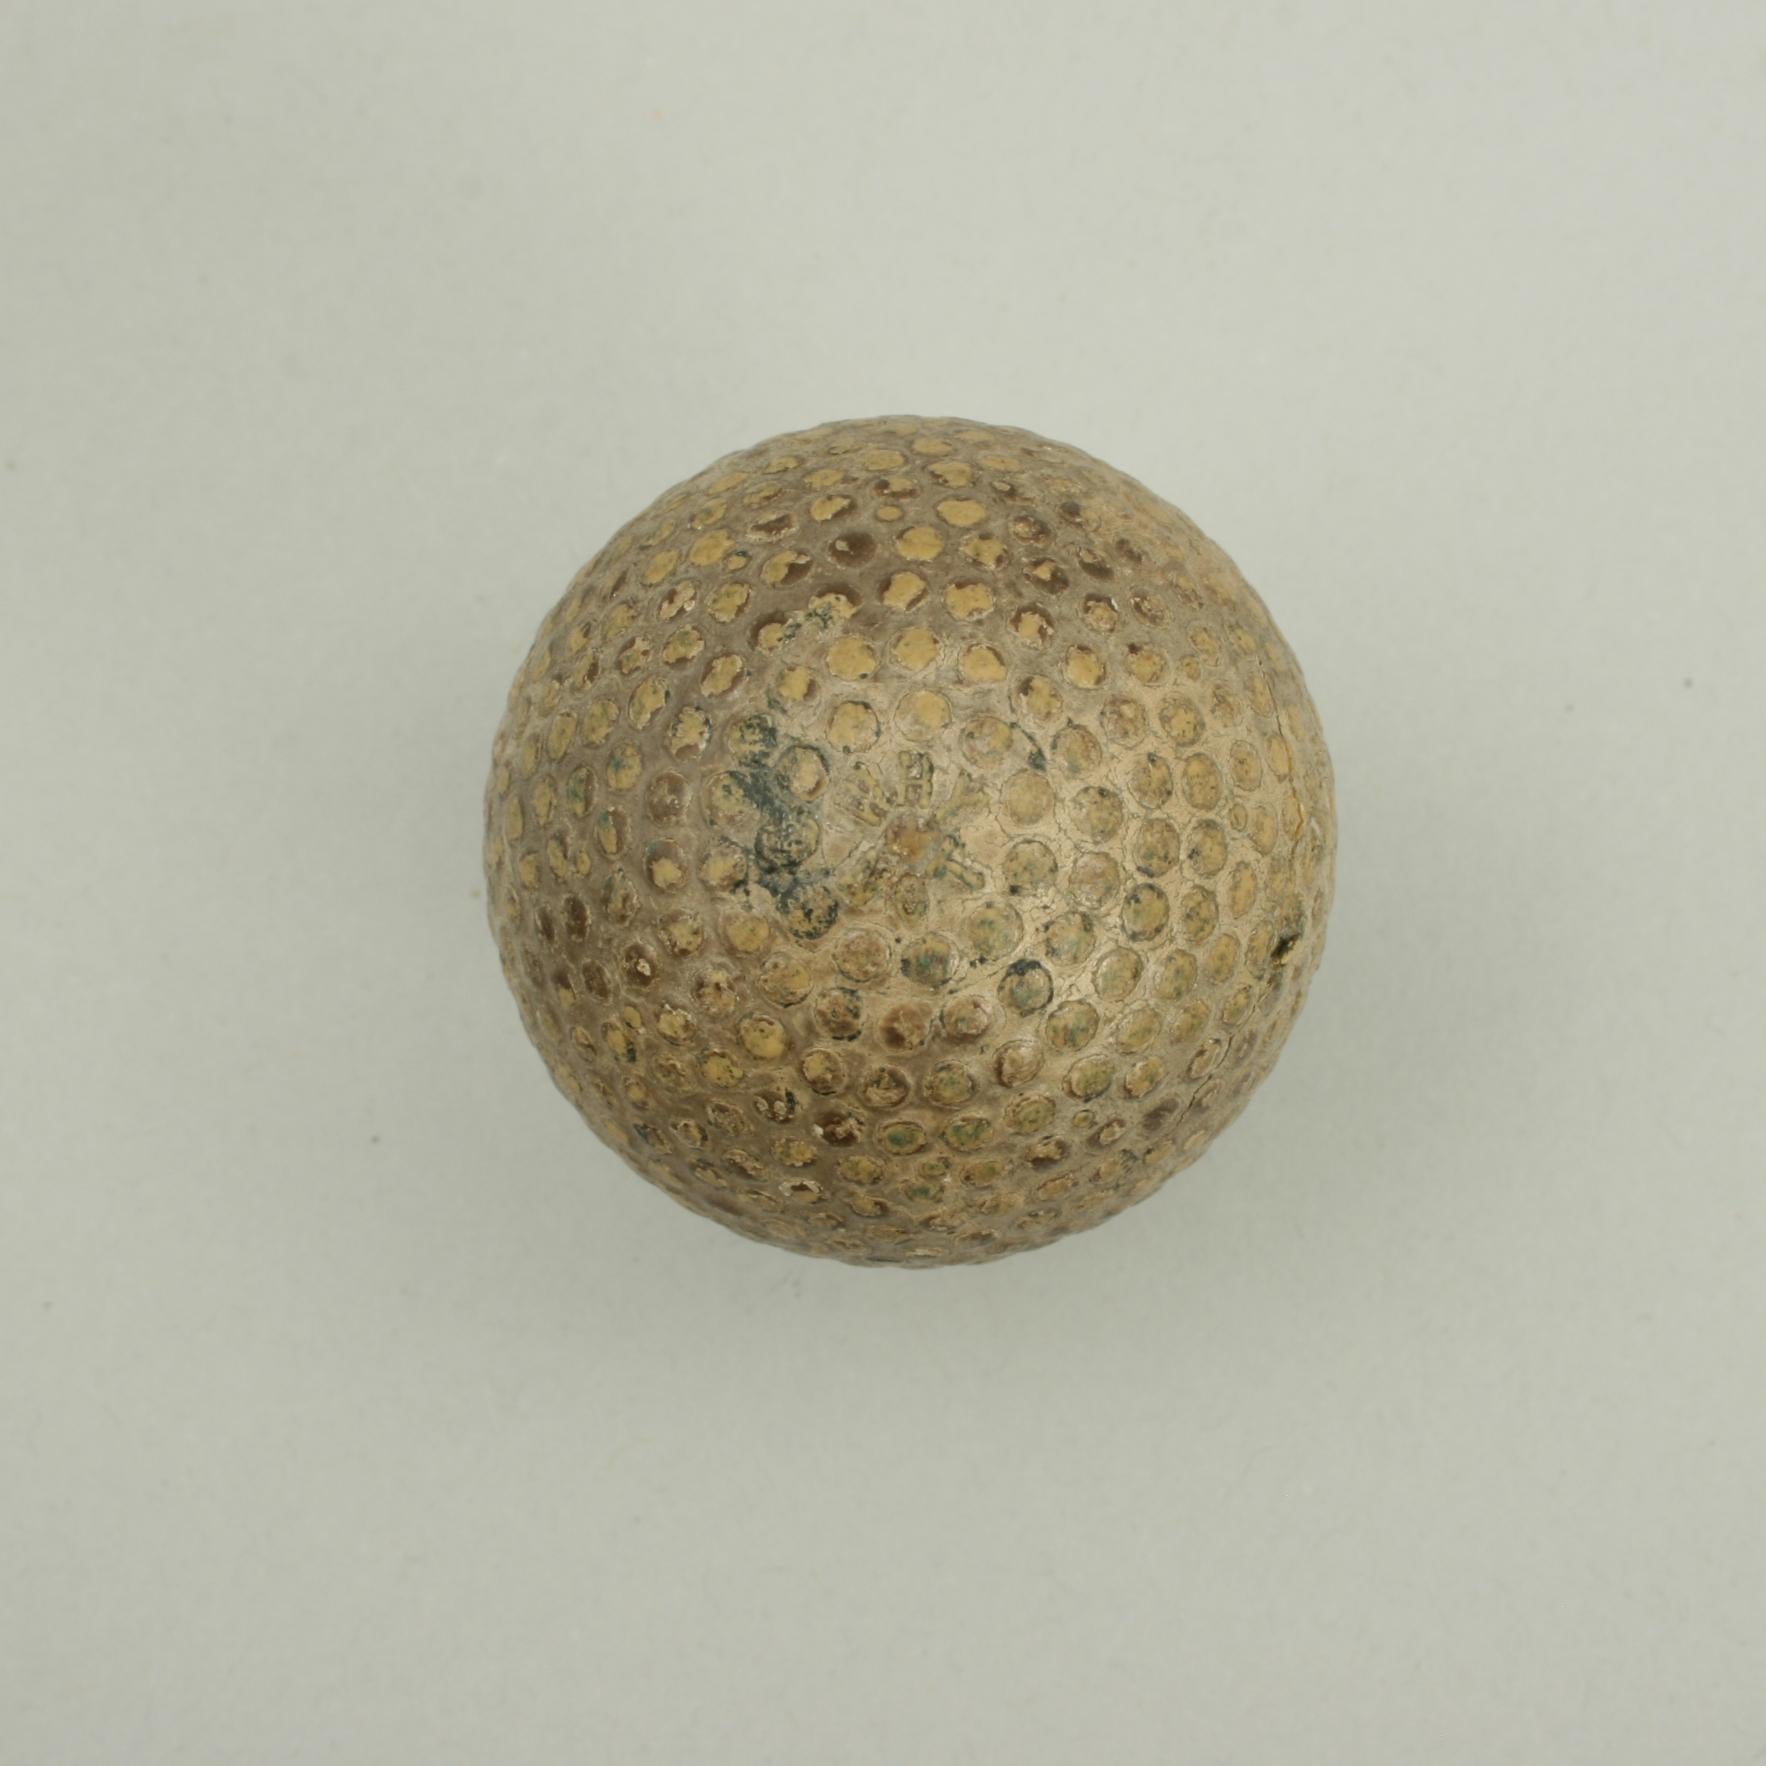 'WHY NOT' Bramble Golf Ball.
A bramble patterned rubber core golf ball manufactured by Henley's Telegraph Works Co., also known as the Henley's Tyre & Rubber Co. Ltd. London, England. The ball has 'Why Not' on both poles with a moulded bramble